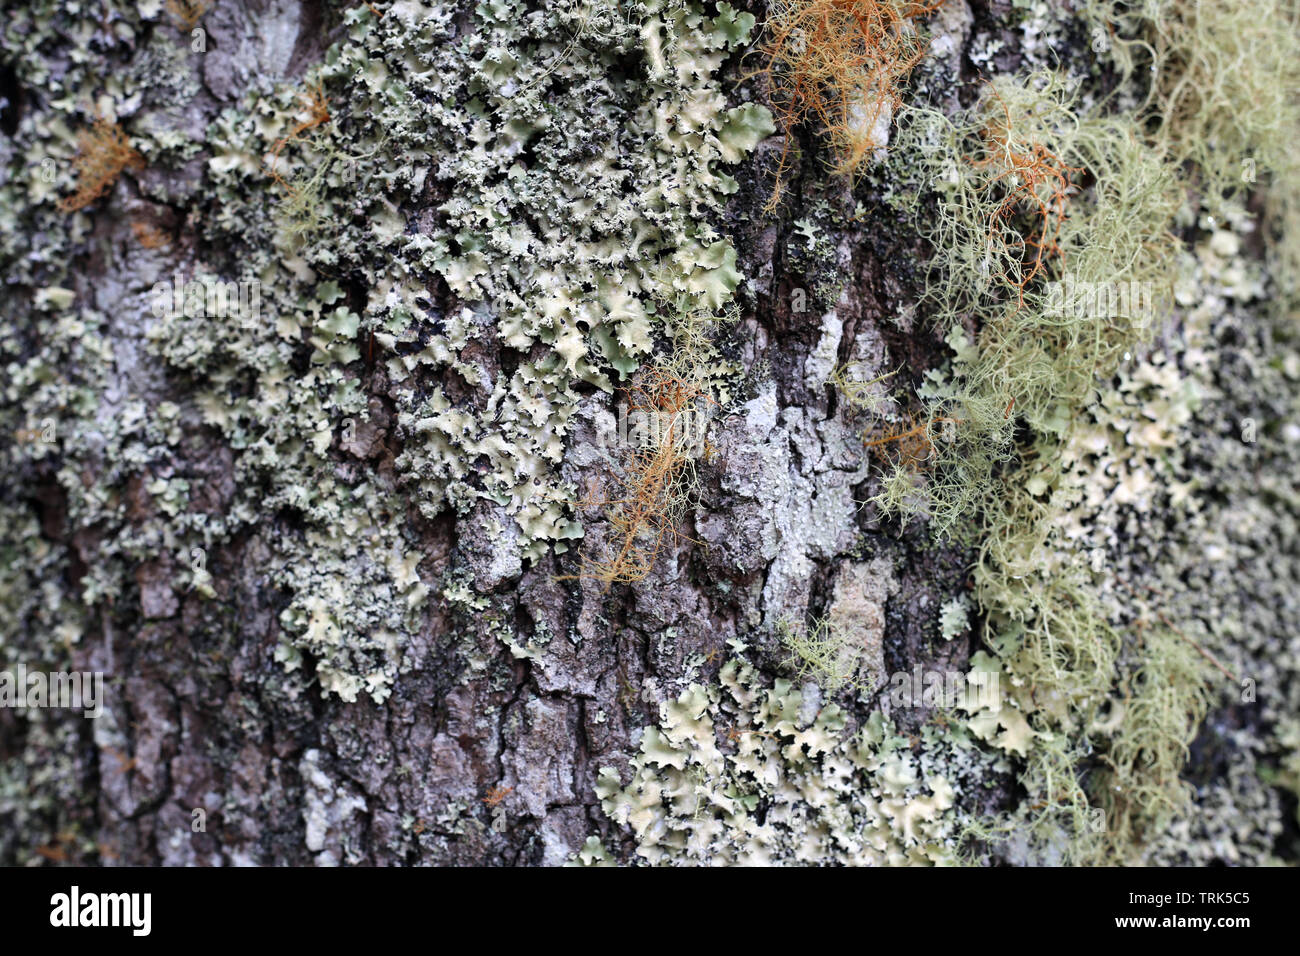 Texture of a tree trunk with a lot of white, grey and orange lichen growing on it. Photographed in the forests of the island of Madeira, Portugal. Stock Photo